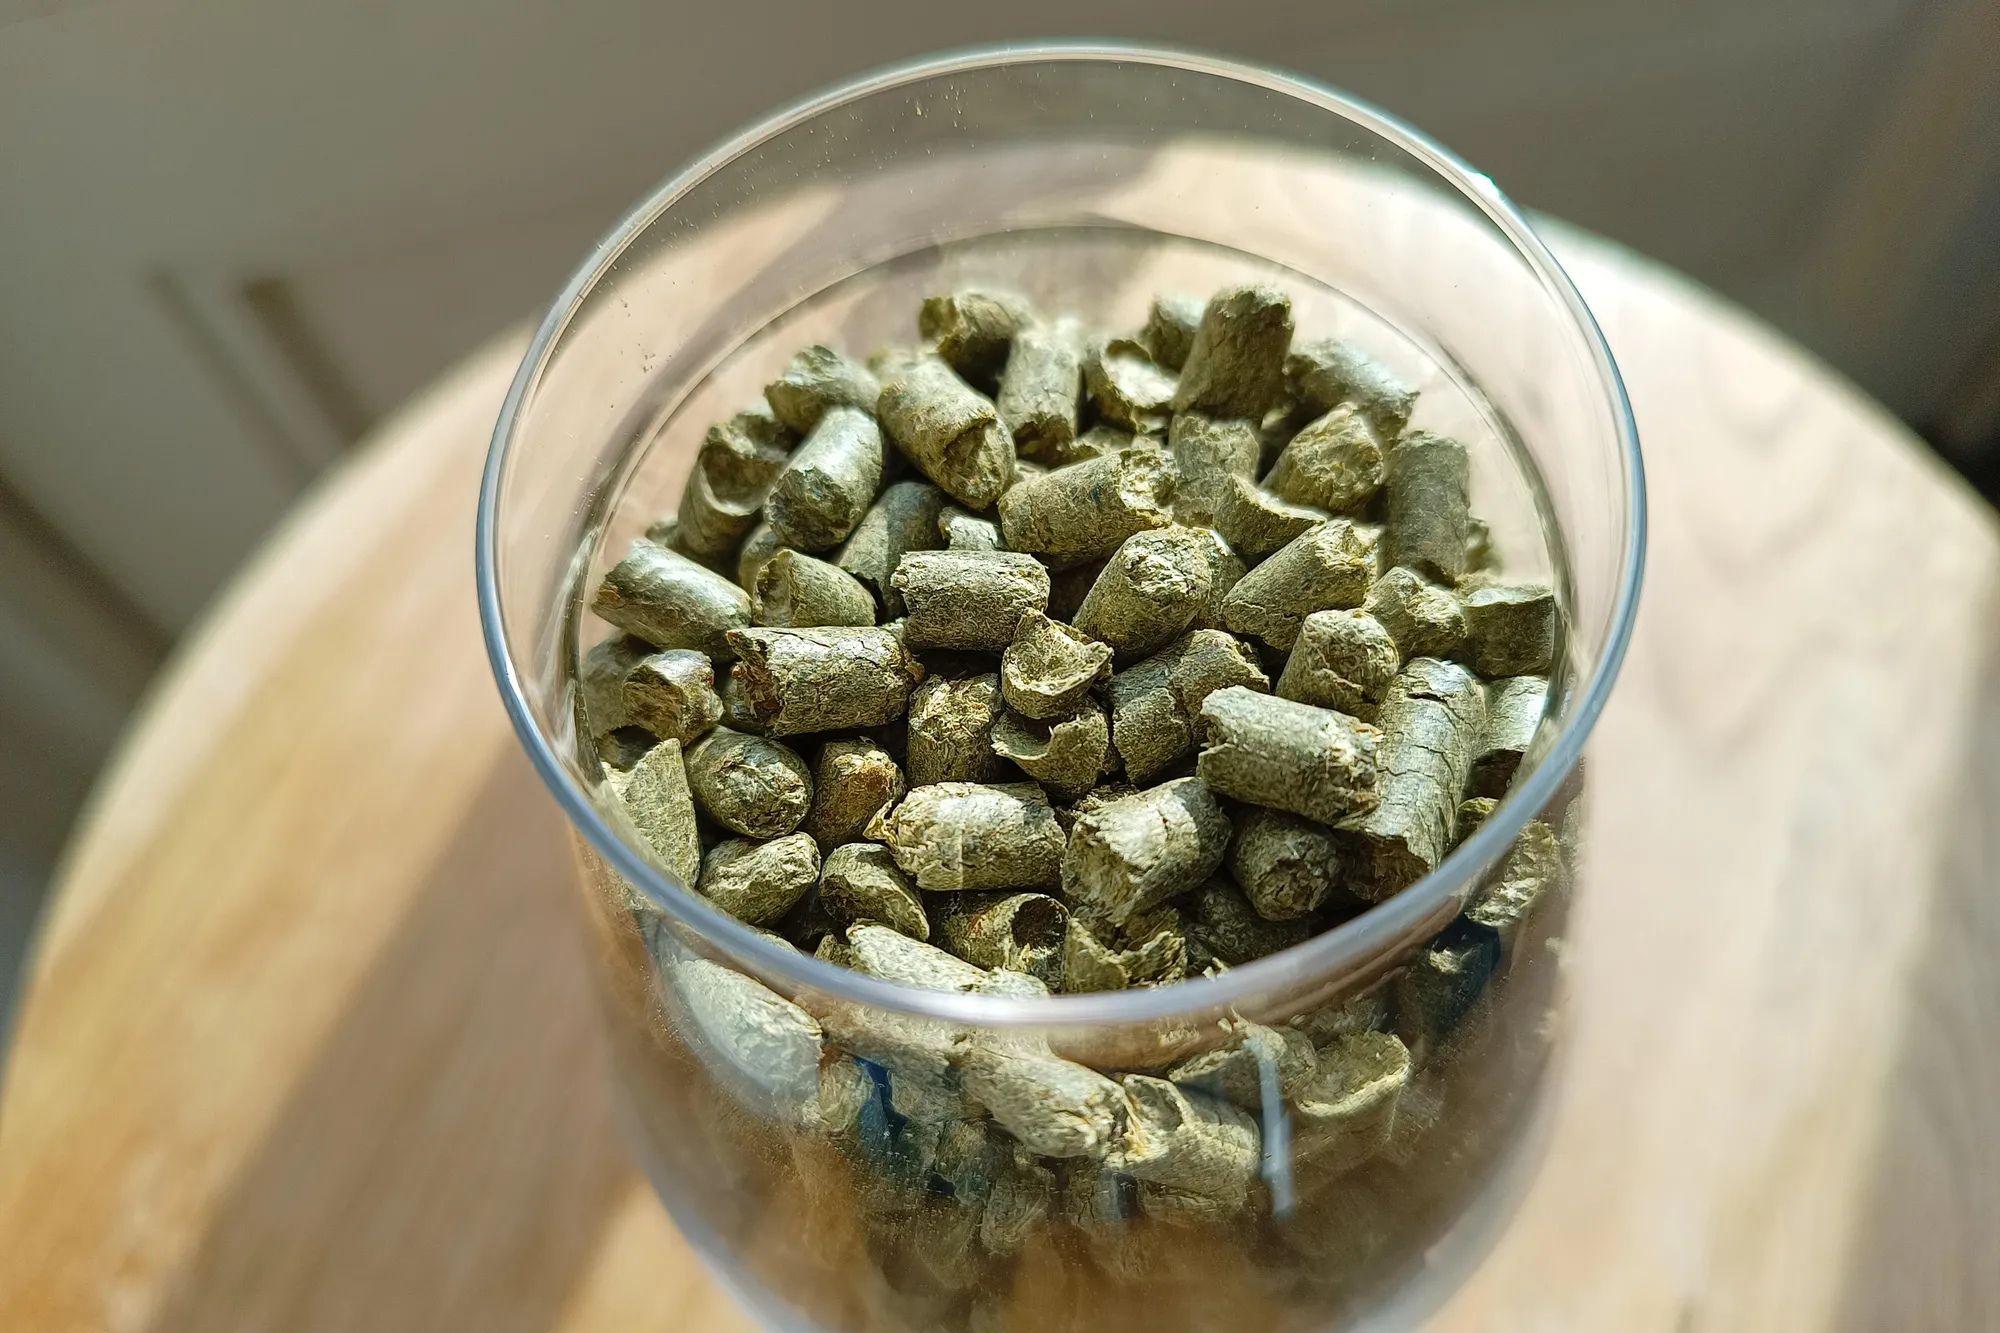 Hop additions in beer brewing: It’s all about the right moment